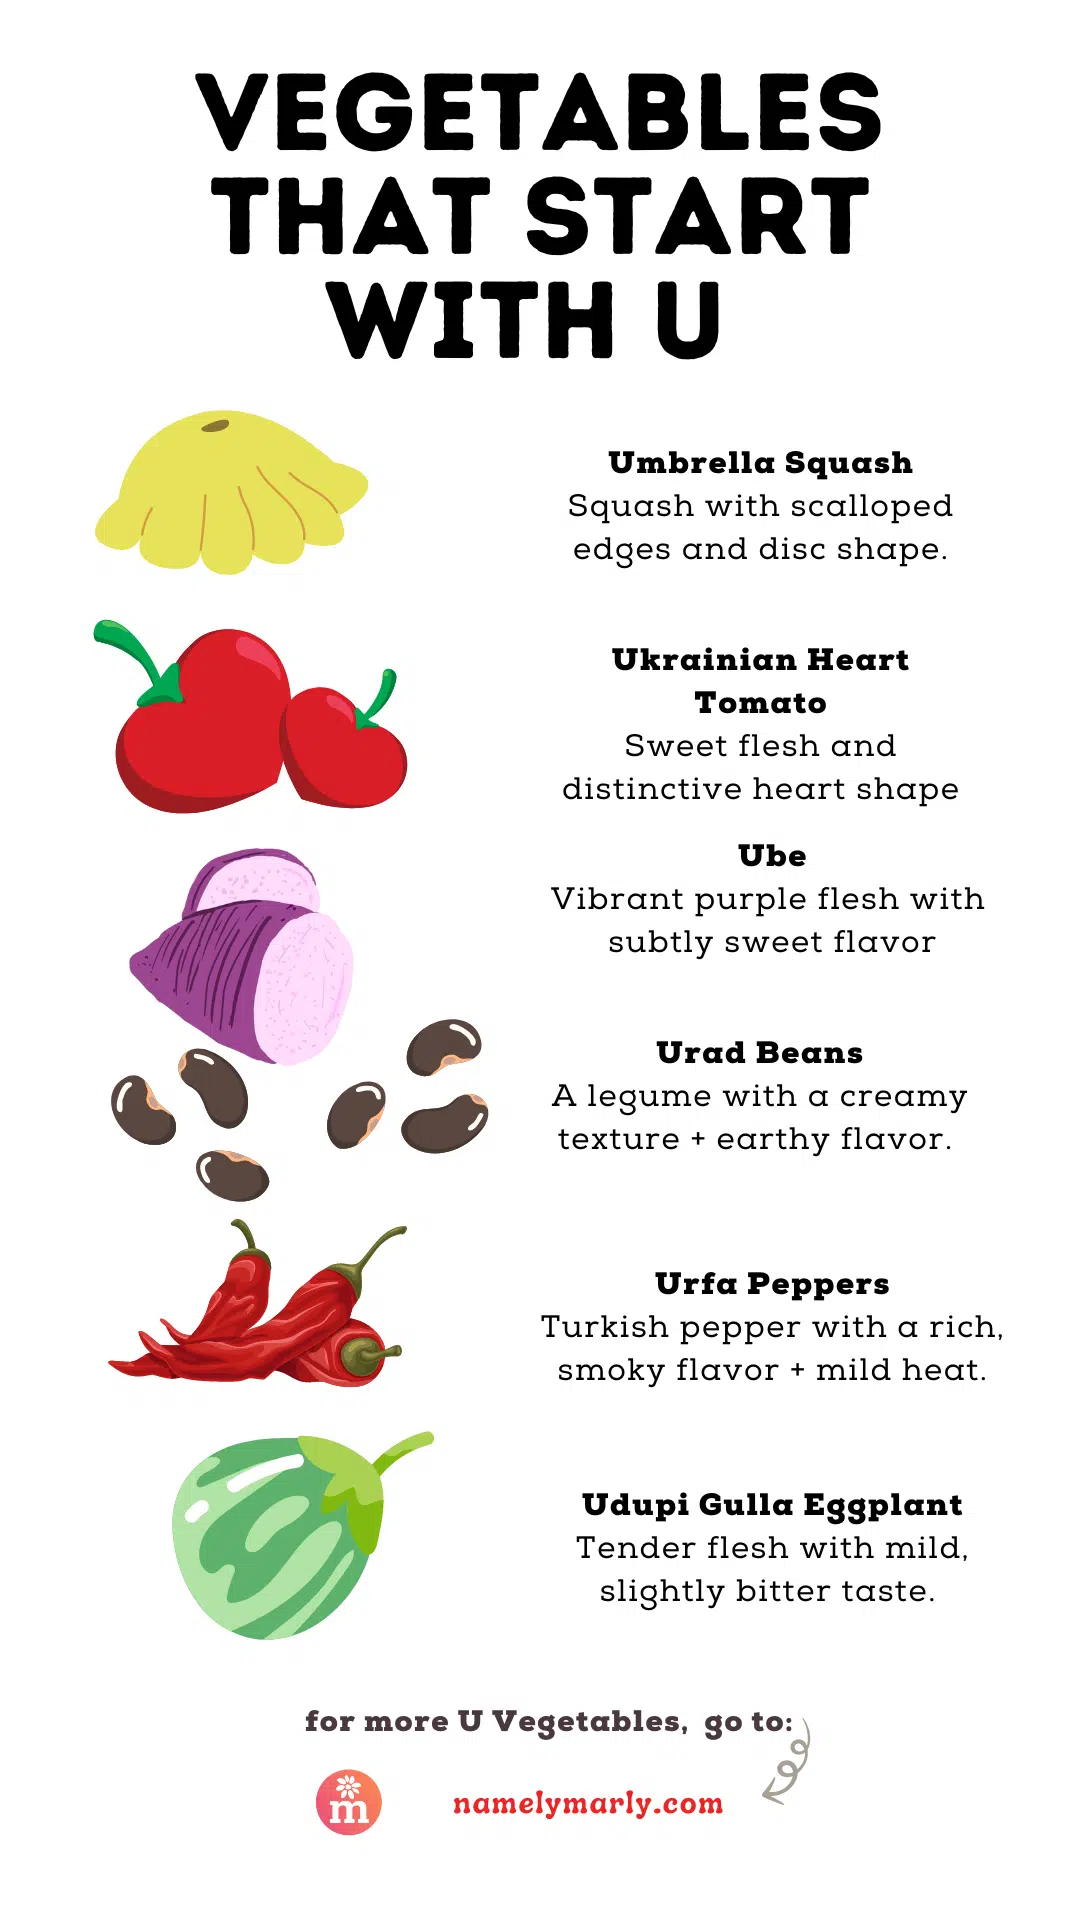 Discover a Variety of U Vegetables: Illustrated graphic showcasing vegetables that start with the letter 'U.' Includes Umbrella Squash, characterized by scalloped edges and a disk shape; Ukrainian Heart Tomatoes, known for their sweet flesh and distinctive heart shape; Ube, boasting vibrant purple flesh with a subtly sweet flavor; Urad Beans, legumes with a creamy texture and earthy flavor; Urfa Peppers, Turkish peppers with a rich, smoky flavor and mild heat; and Udupi Gulla Eggplant, featuring tender flesh with a mild, slightly bitter taste. For more U Vegetables, visit: namelymarly.com